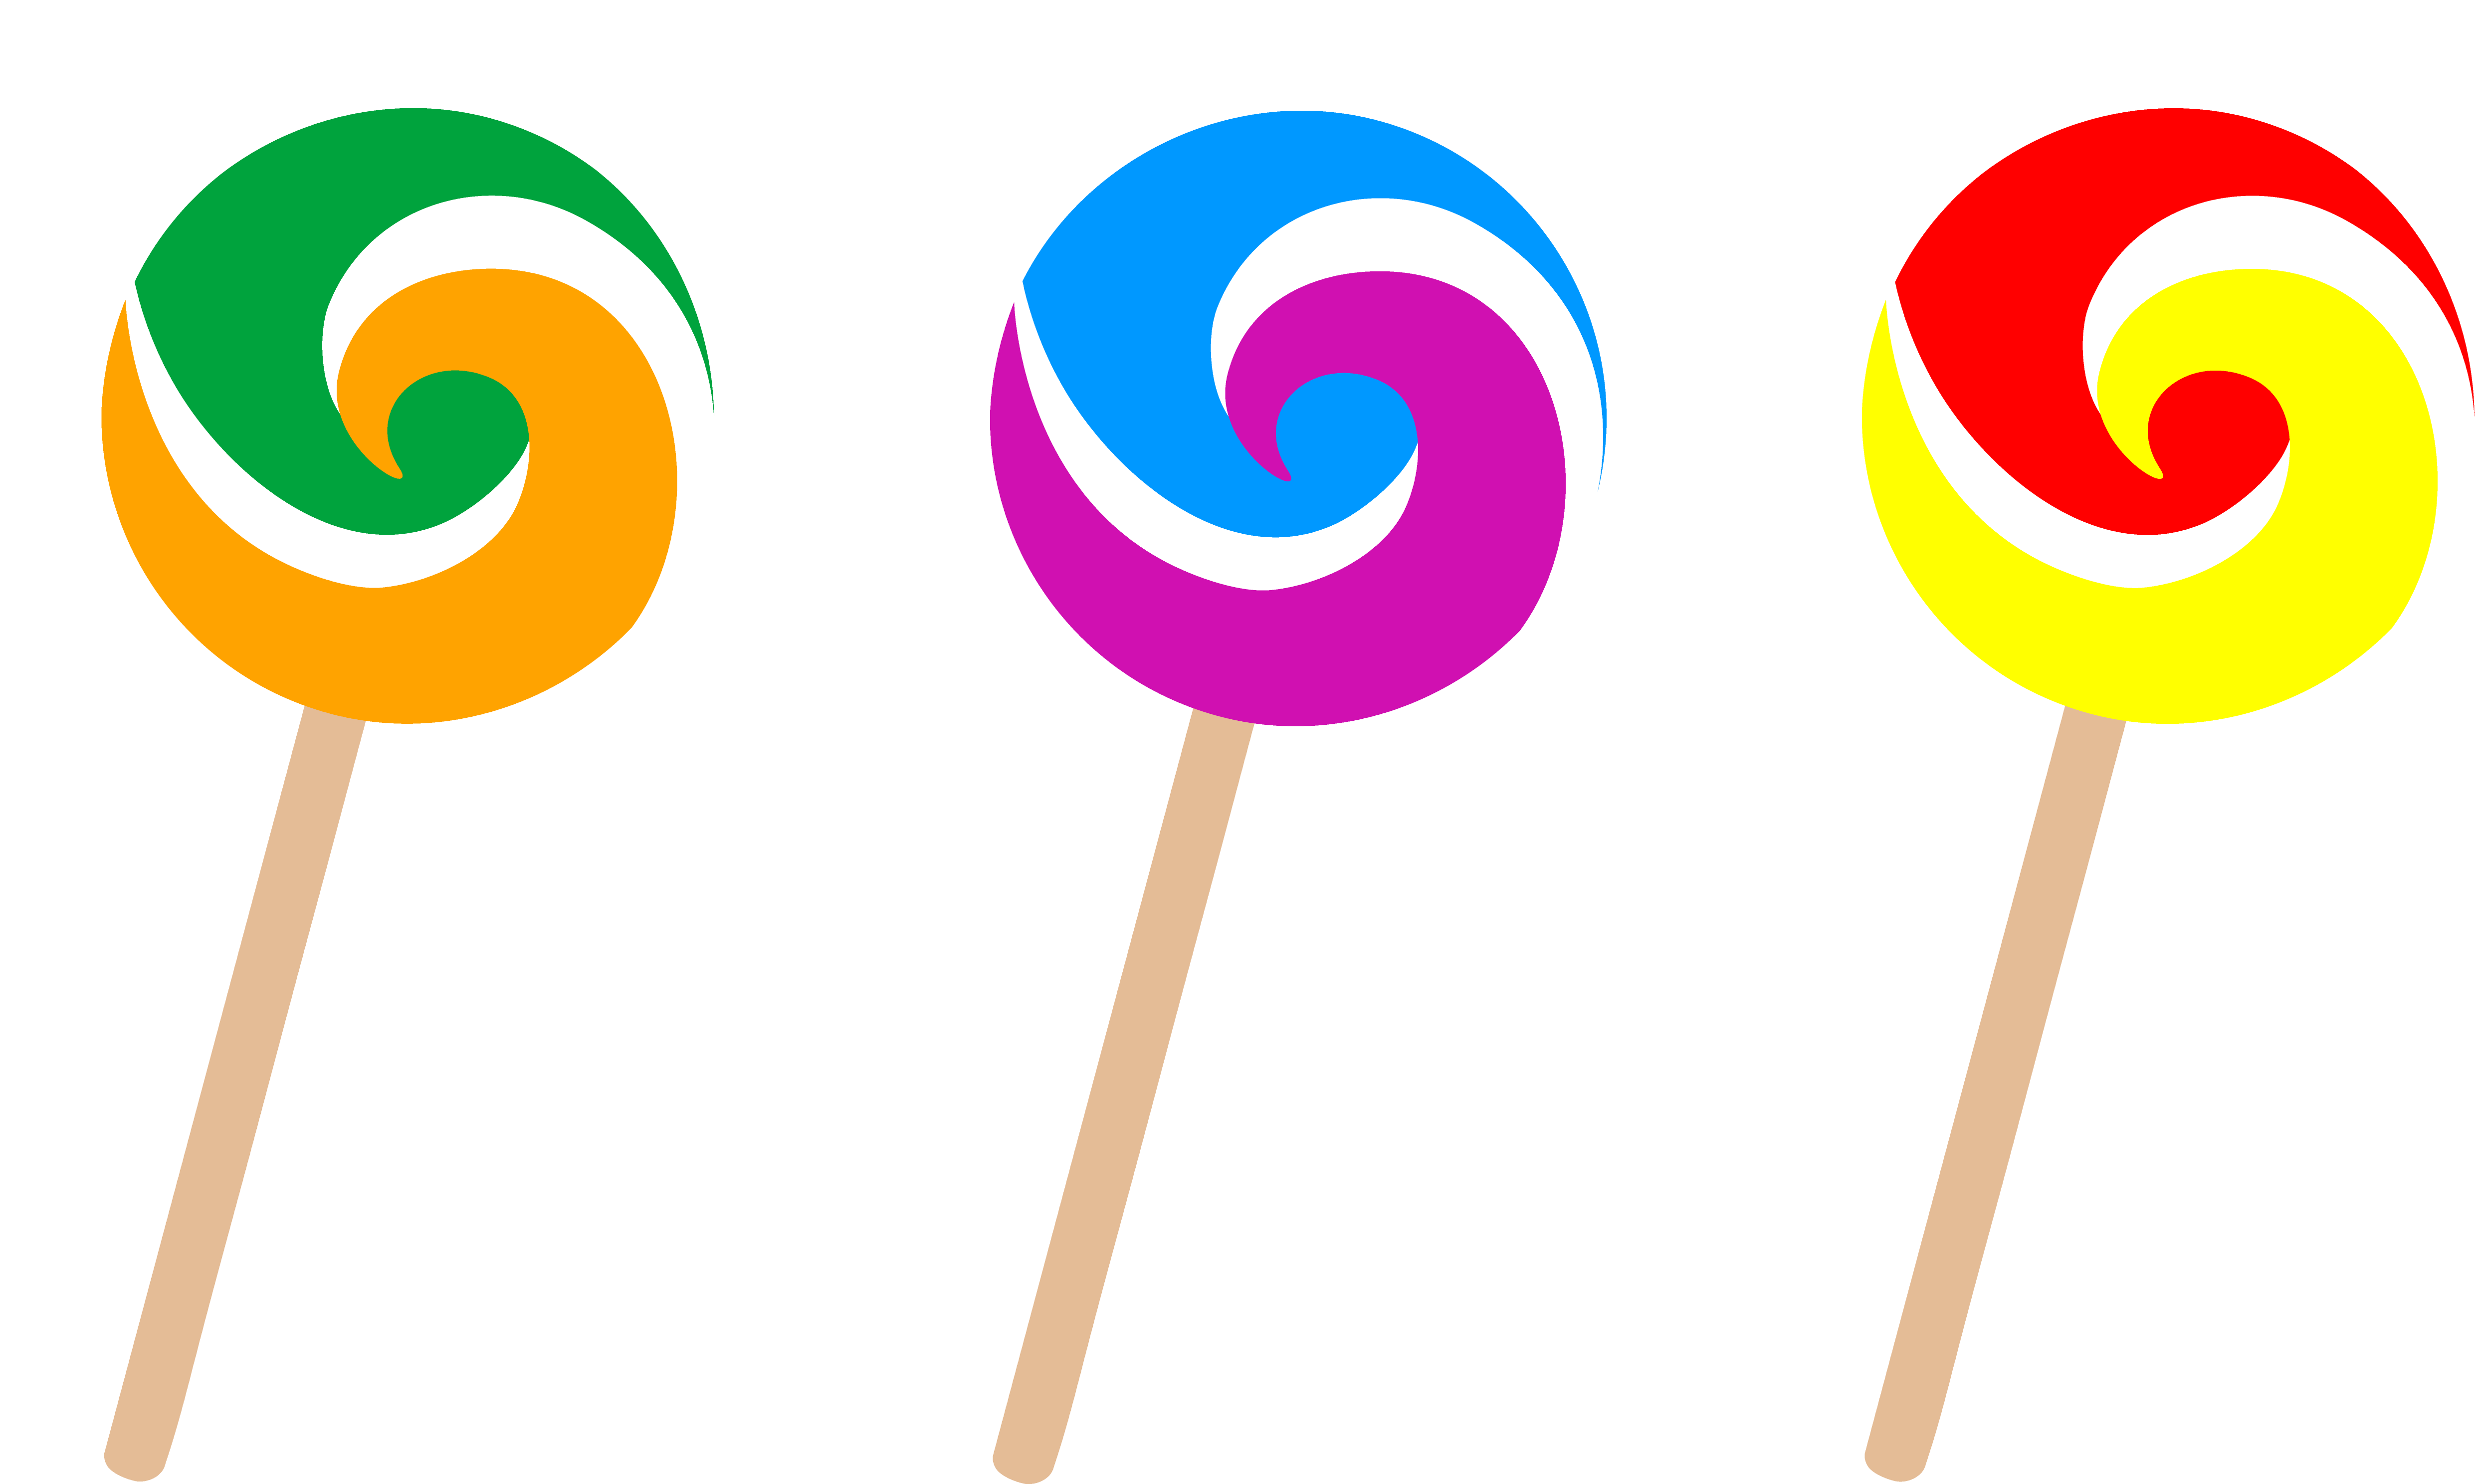 Free Sweets Cliparts, Download Free Clip Art, Free Clip Art.